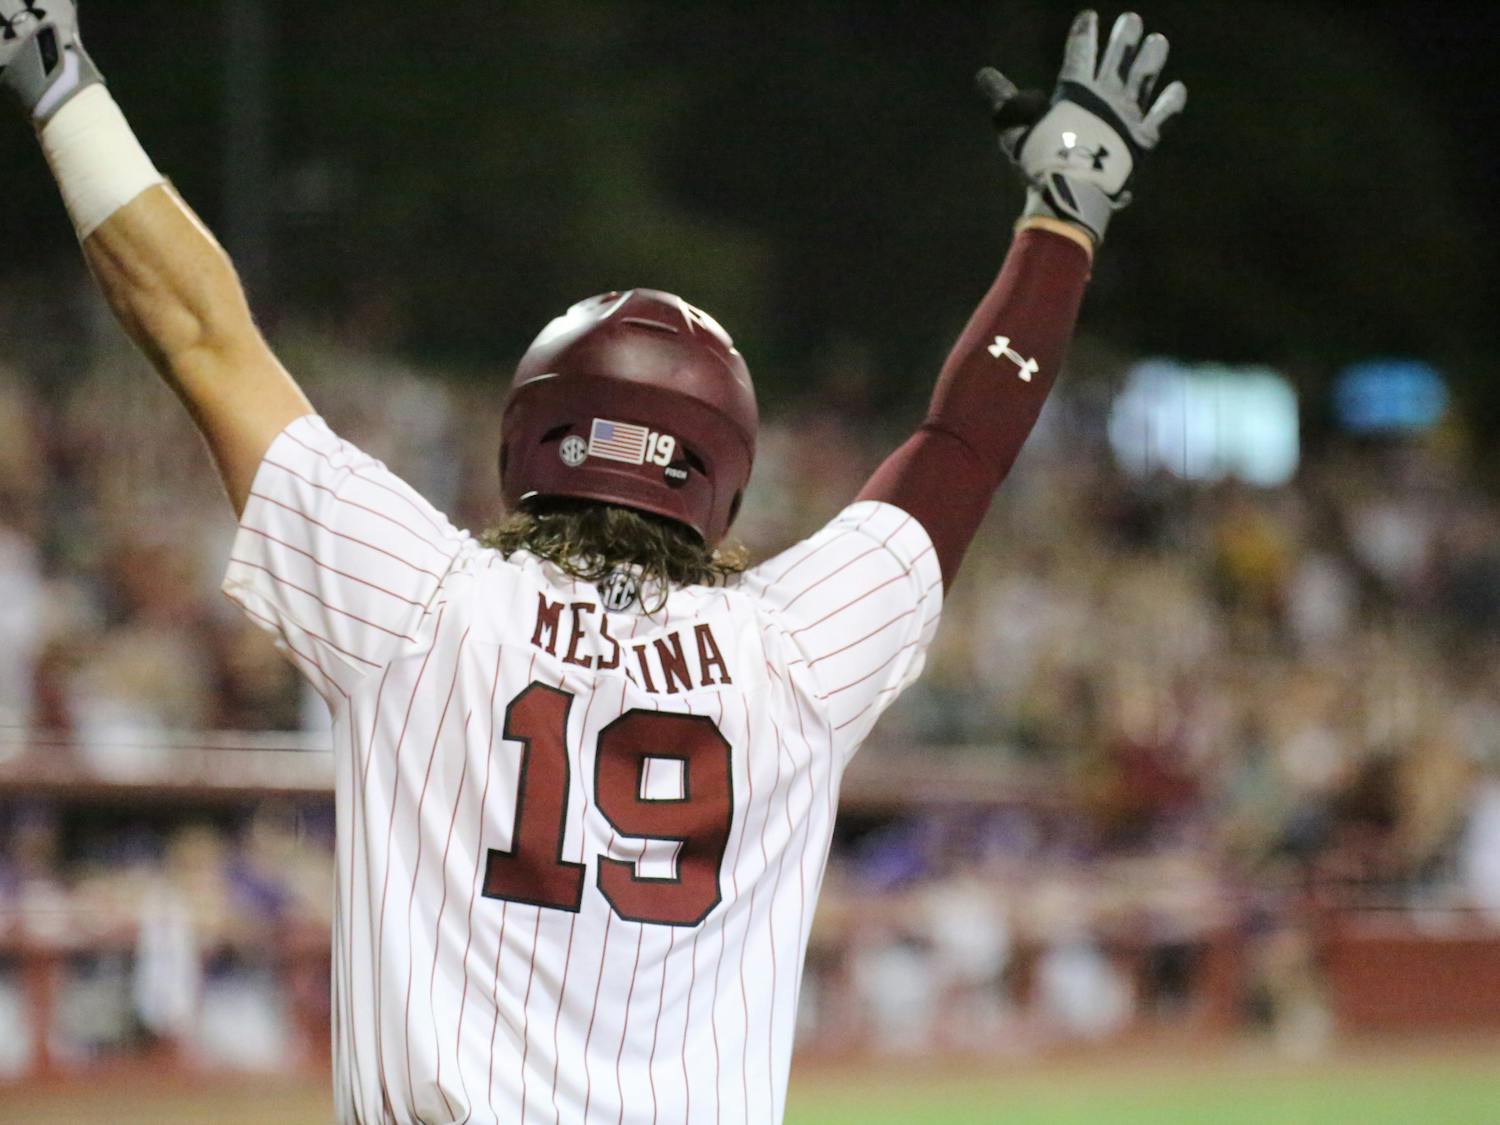 Sophomore catcher Cole Messina throws his hands in the air after freshman outfielder Ethan Petry hits a grand slam for the Gamecocks, expanding its lead against the Tigers. No. 6 South Carolina won the first game of the two-game series 13-5 against No. 1 LSU on April 6, 2023, at Founders Park.&nbsp;